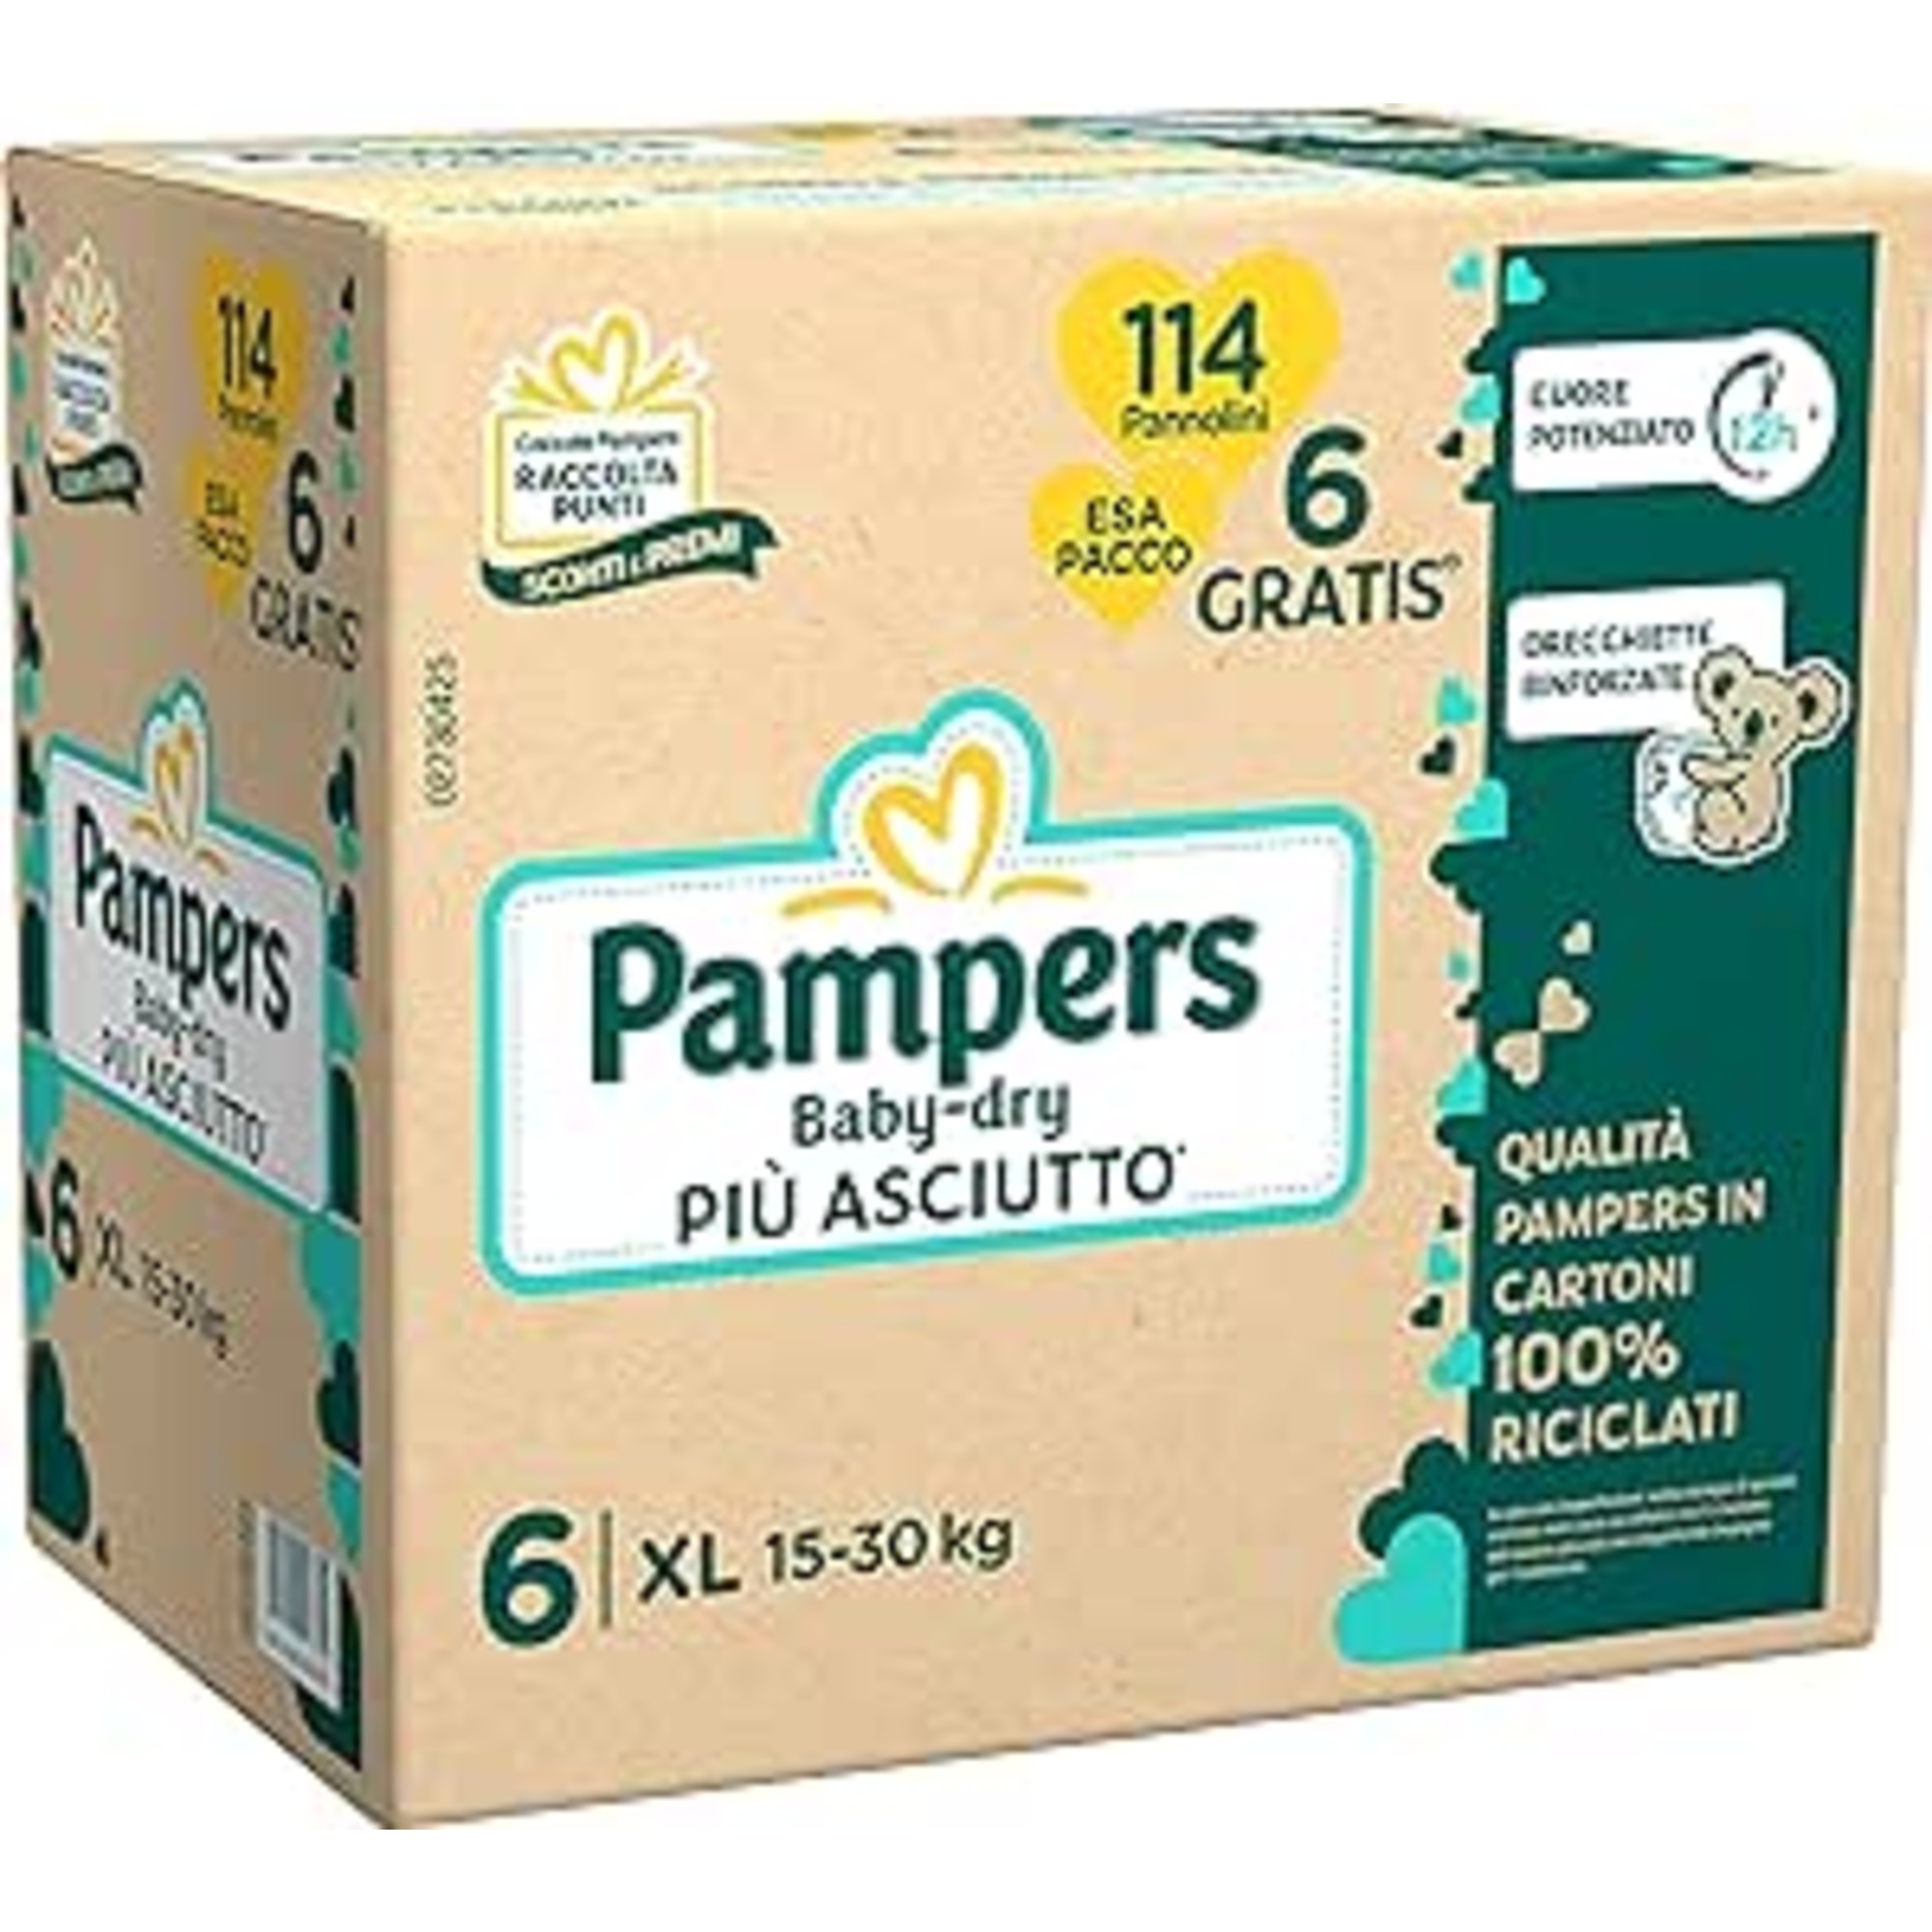 Pampers - esapack  baby dry xl x114 - Pampers